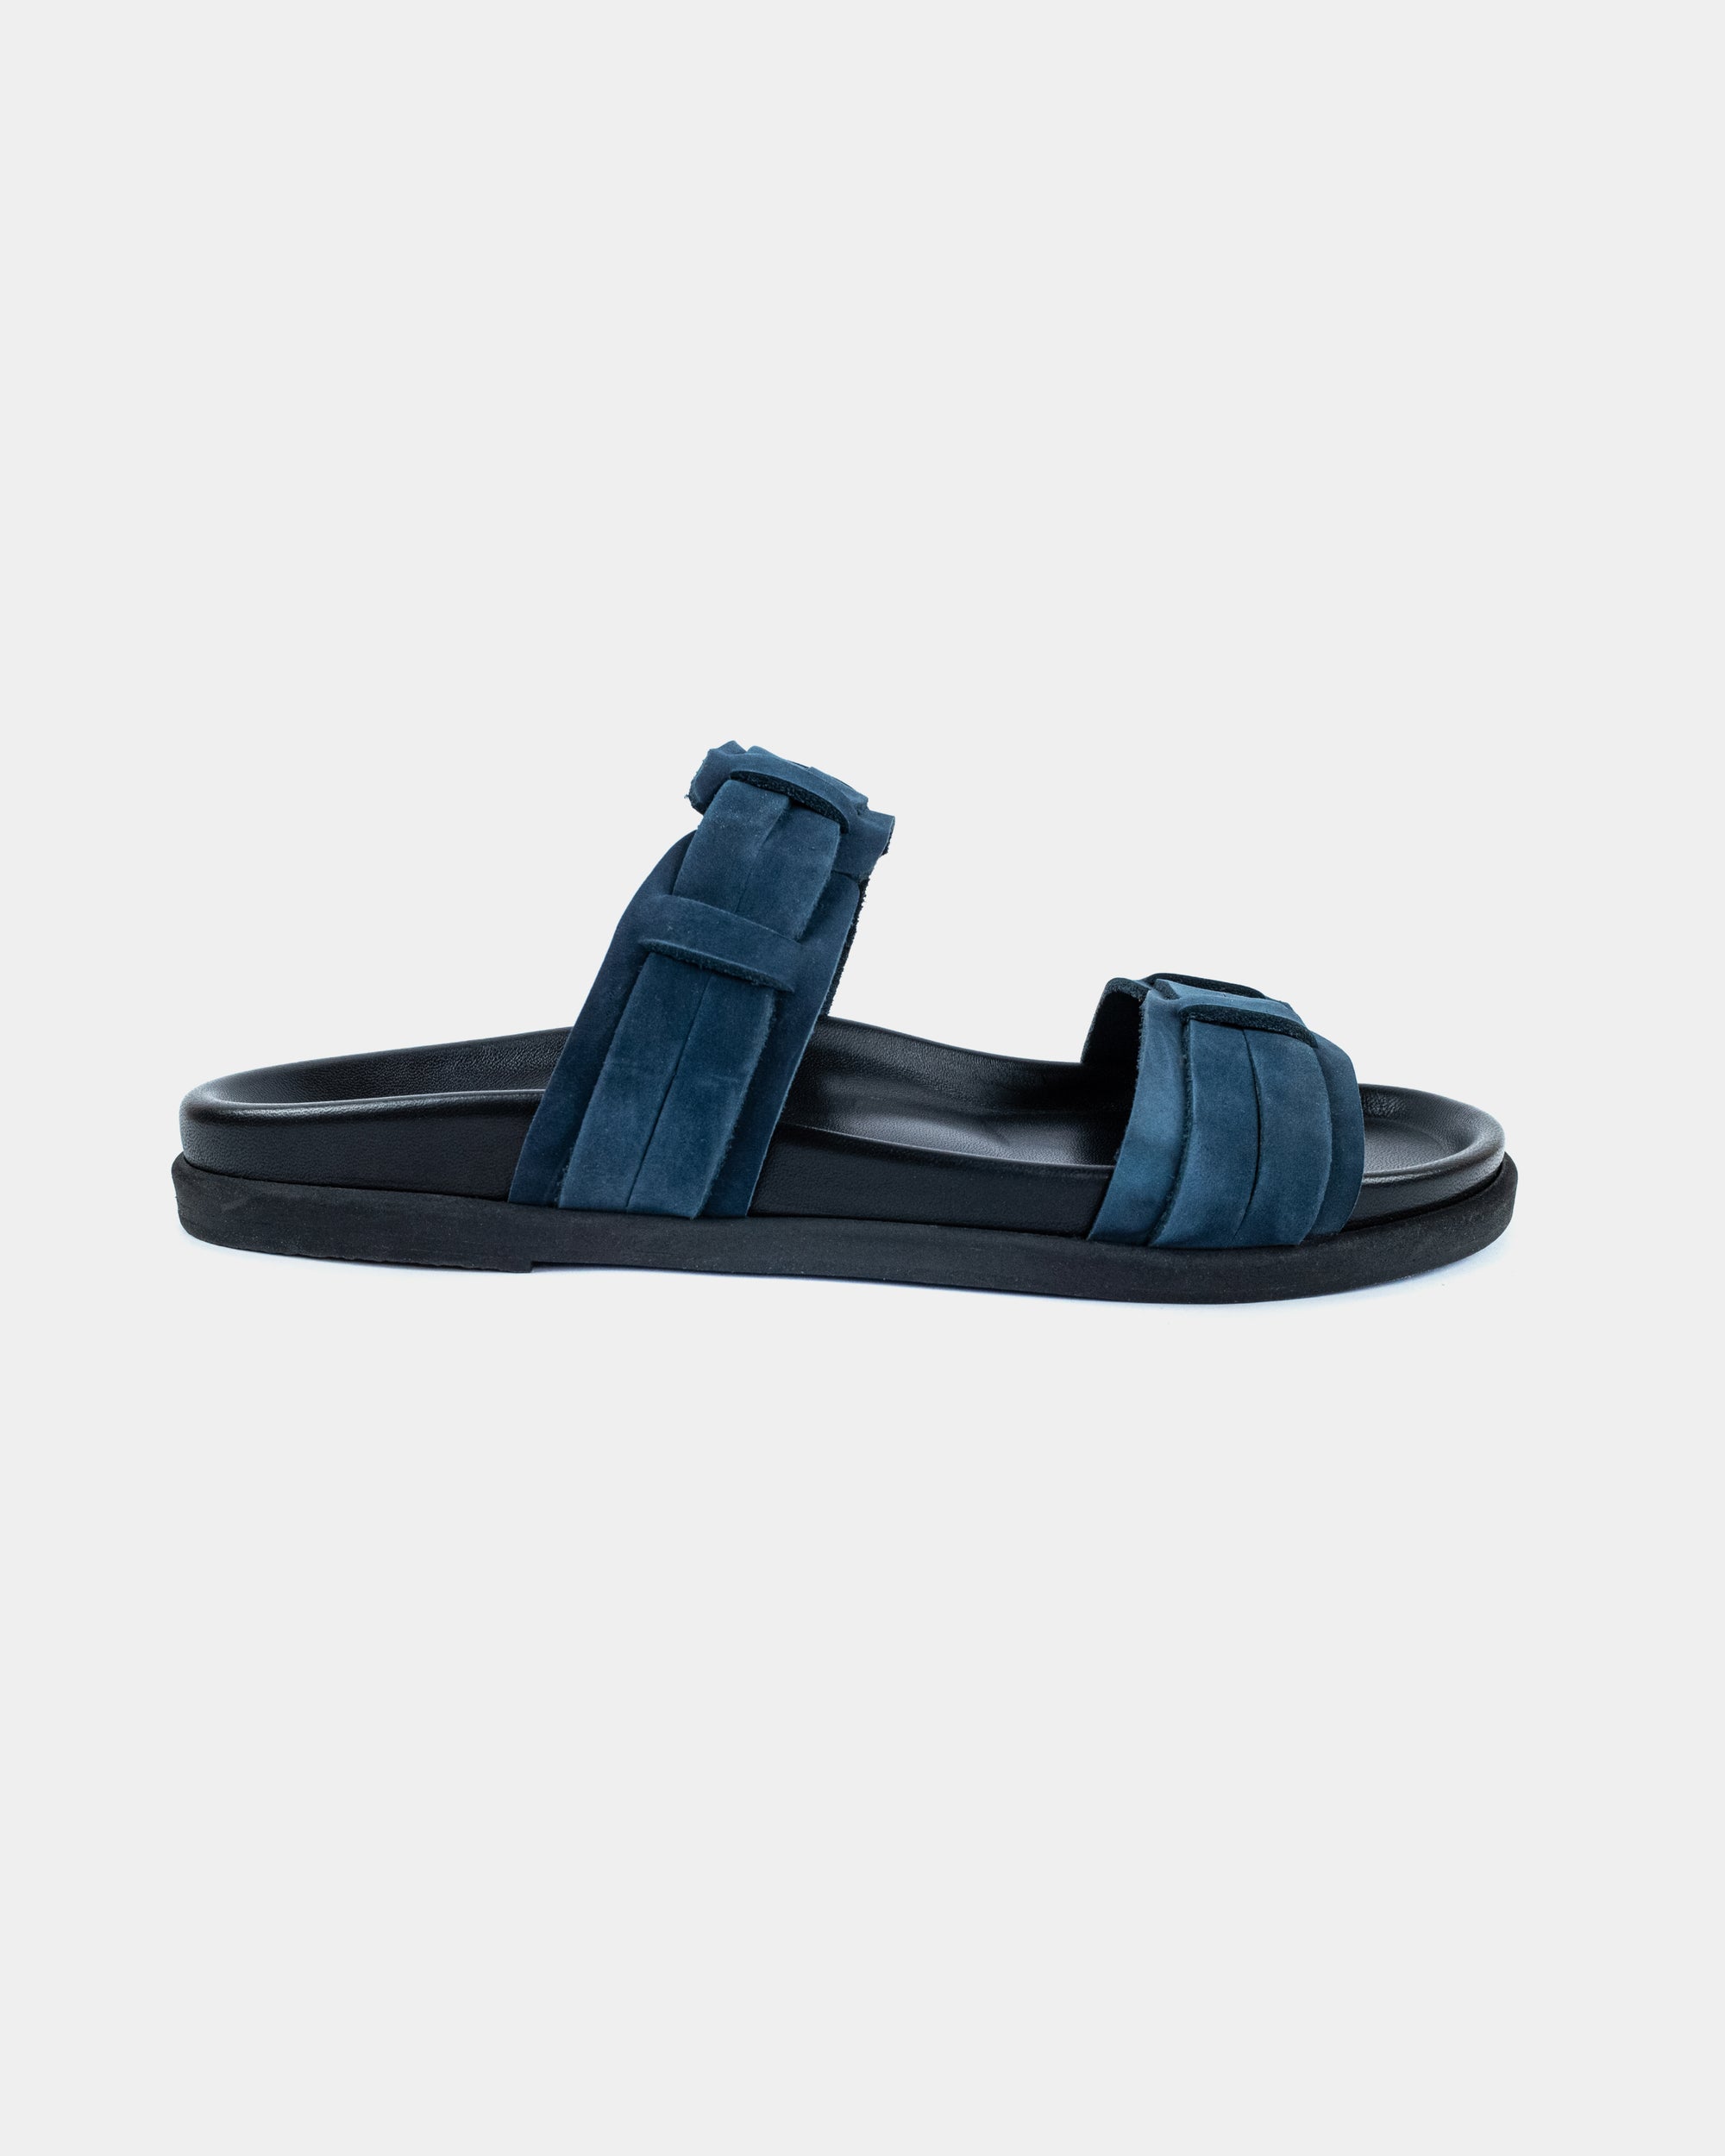 LEATHER SANDALS-FLAT SANDALS-KYMA SANDALS-STRAPPY SANDALS-NAVY